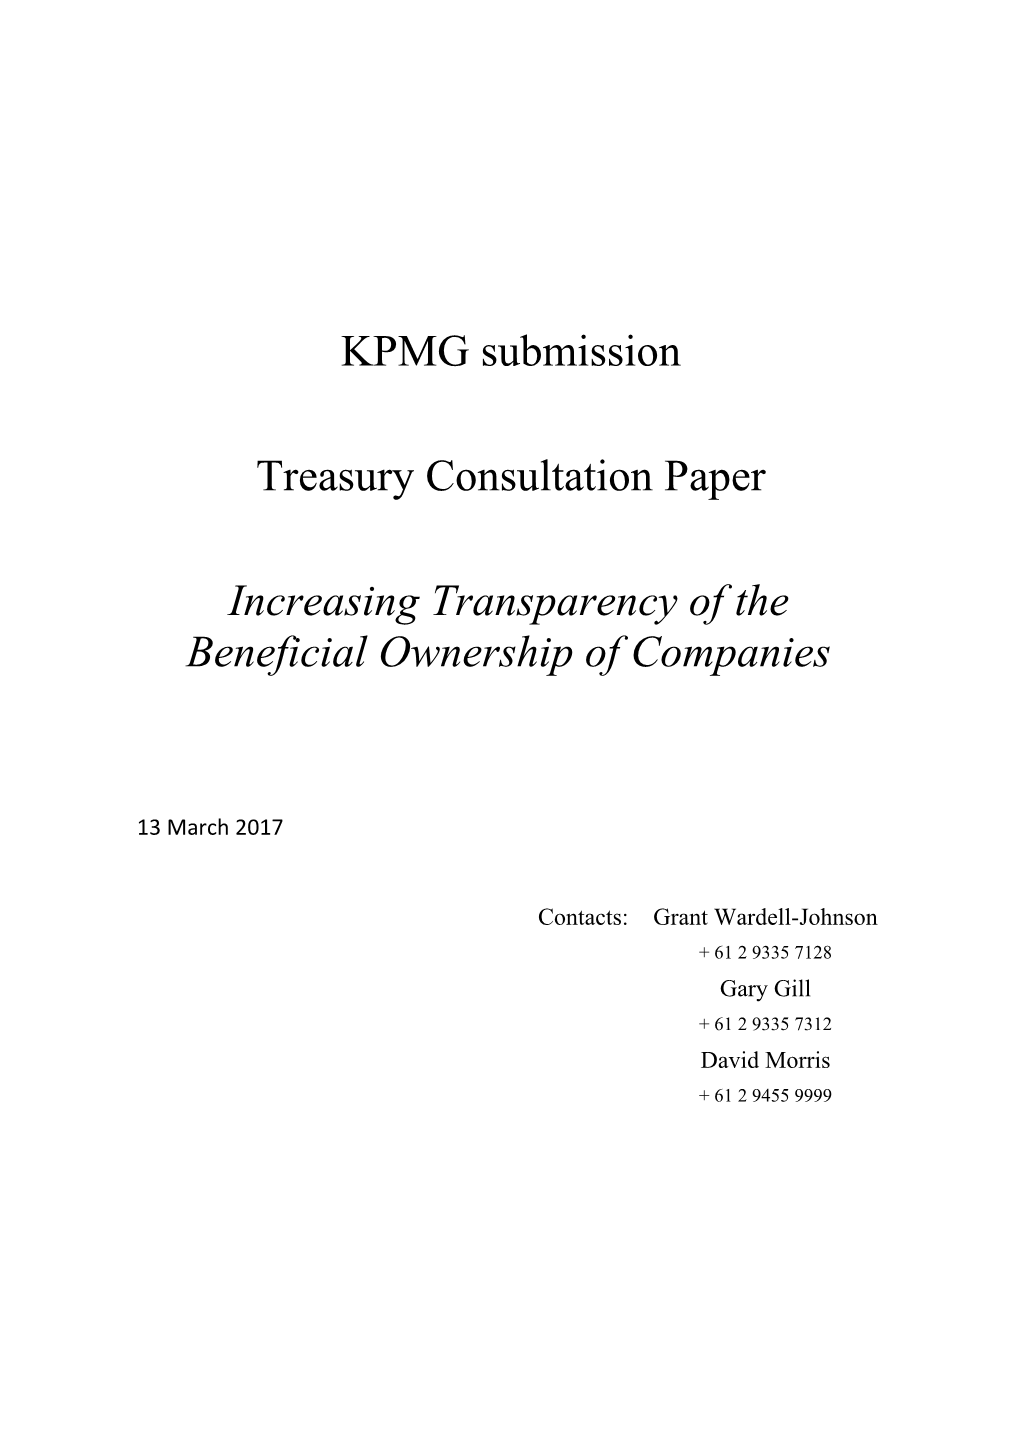 KPMG - Increasing Transparency of the Beneficial Ownership of Companies